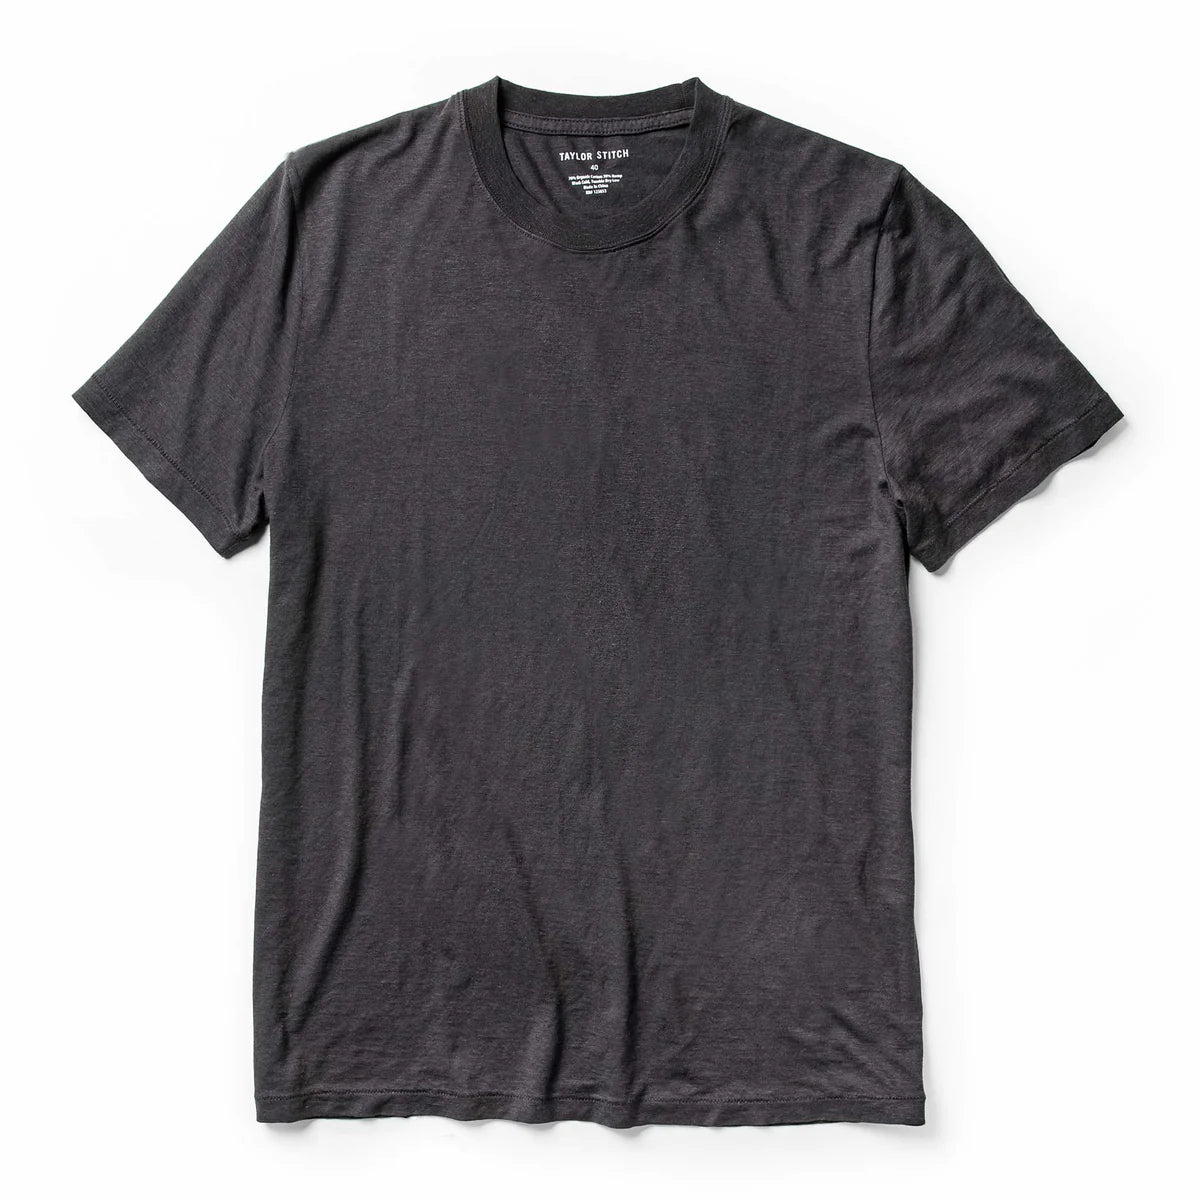 Taylor Stitch - The Cotton Hemp Tee in Charcoal